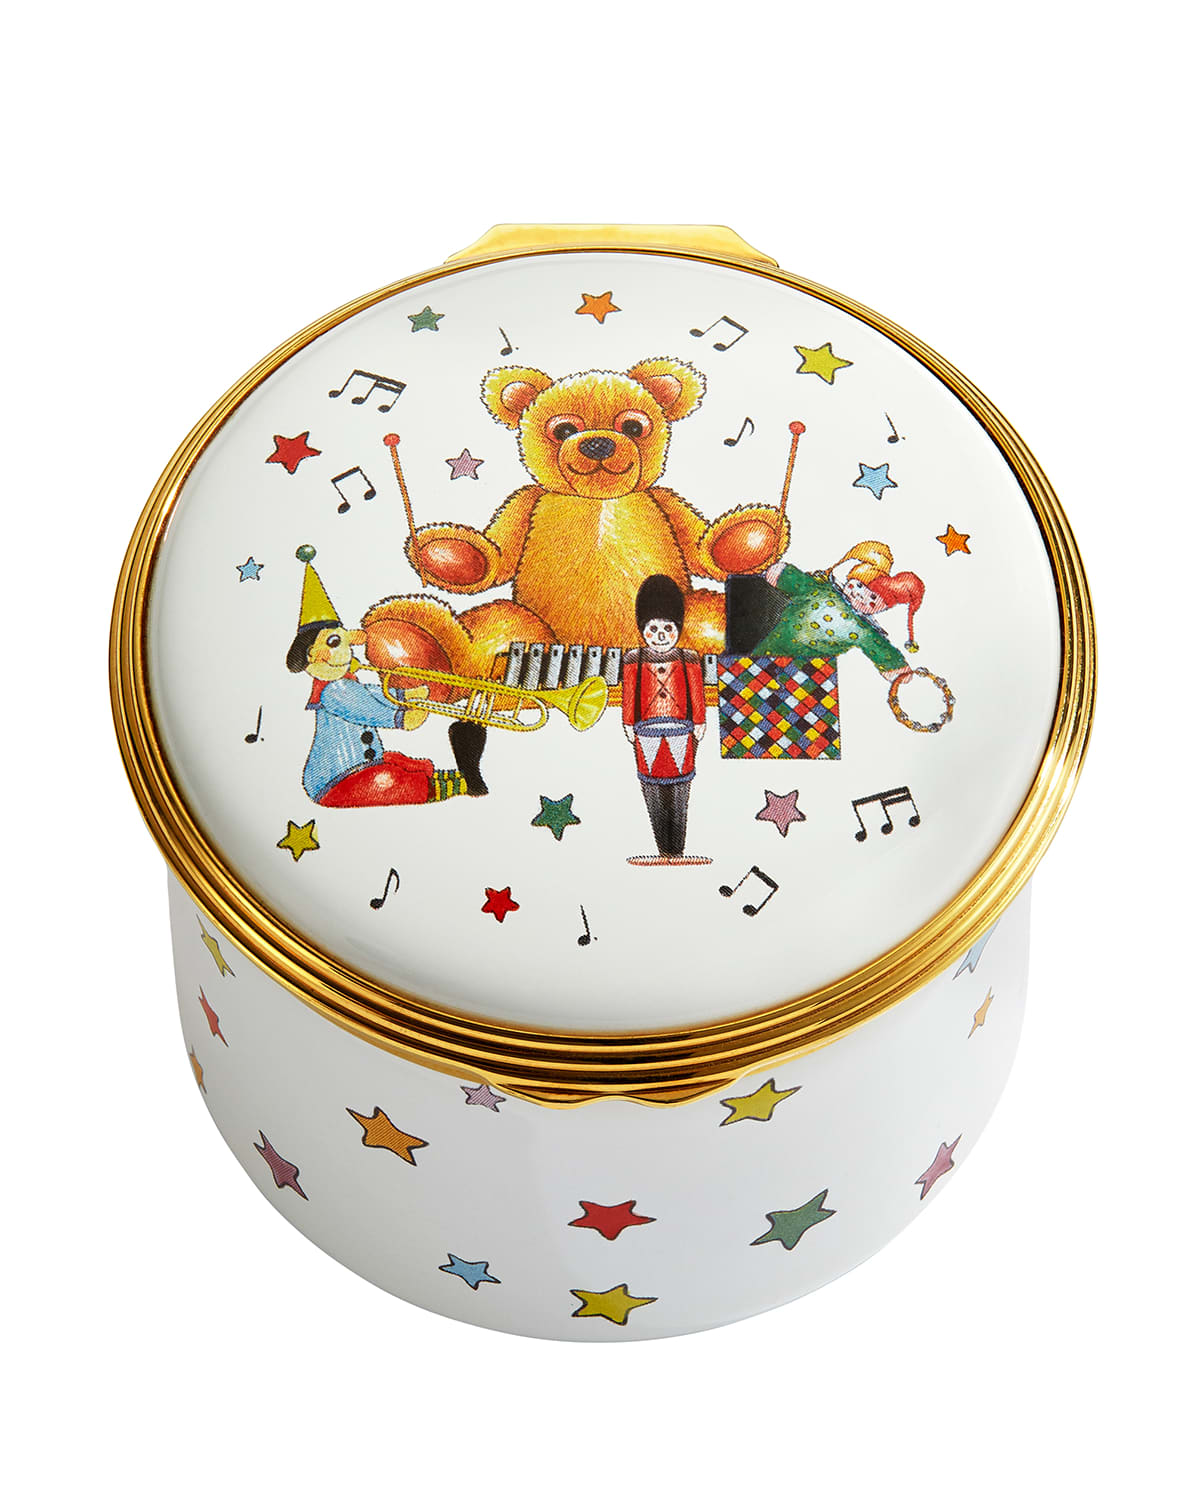 Details about   HALCYON DAYS EXCLUSIVE FOR NEIMAN MARCUS ENAMEL RING BOX TRINKET BOX